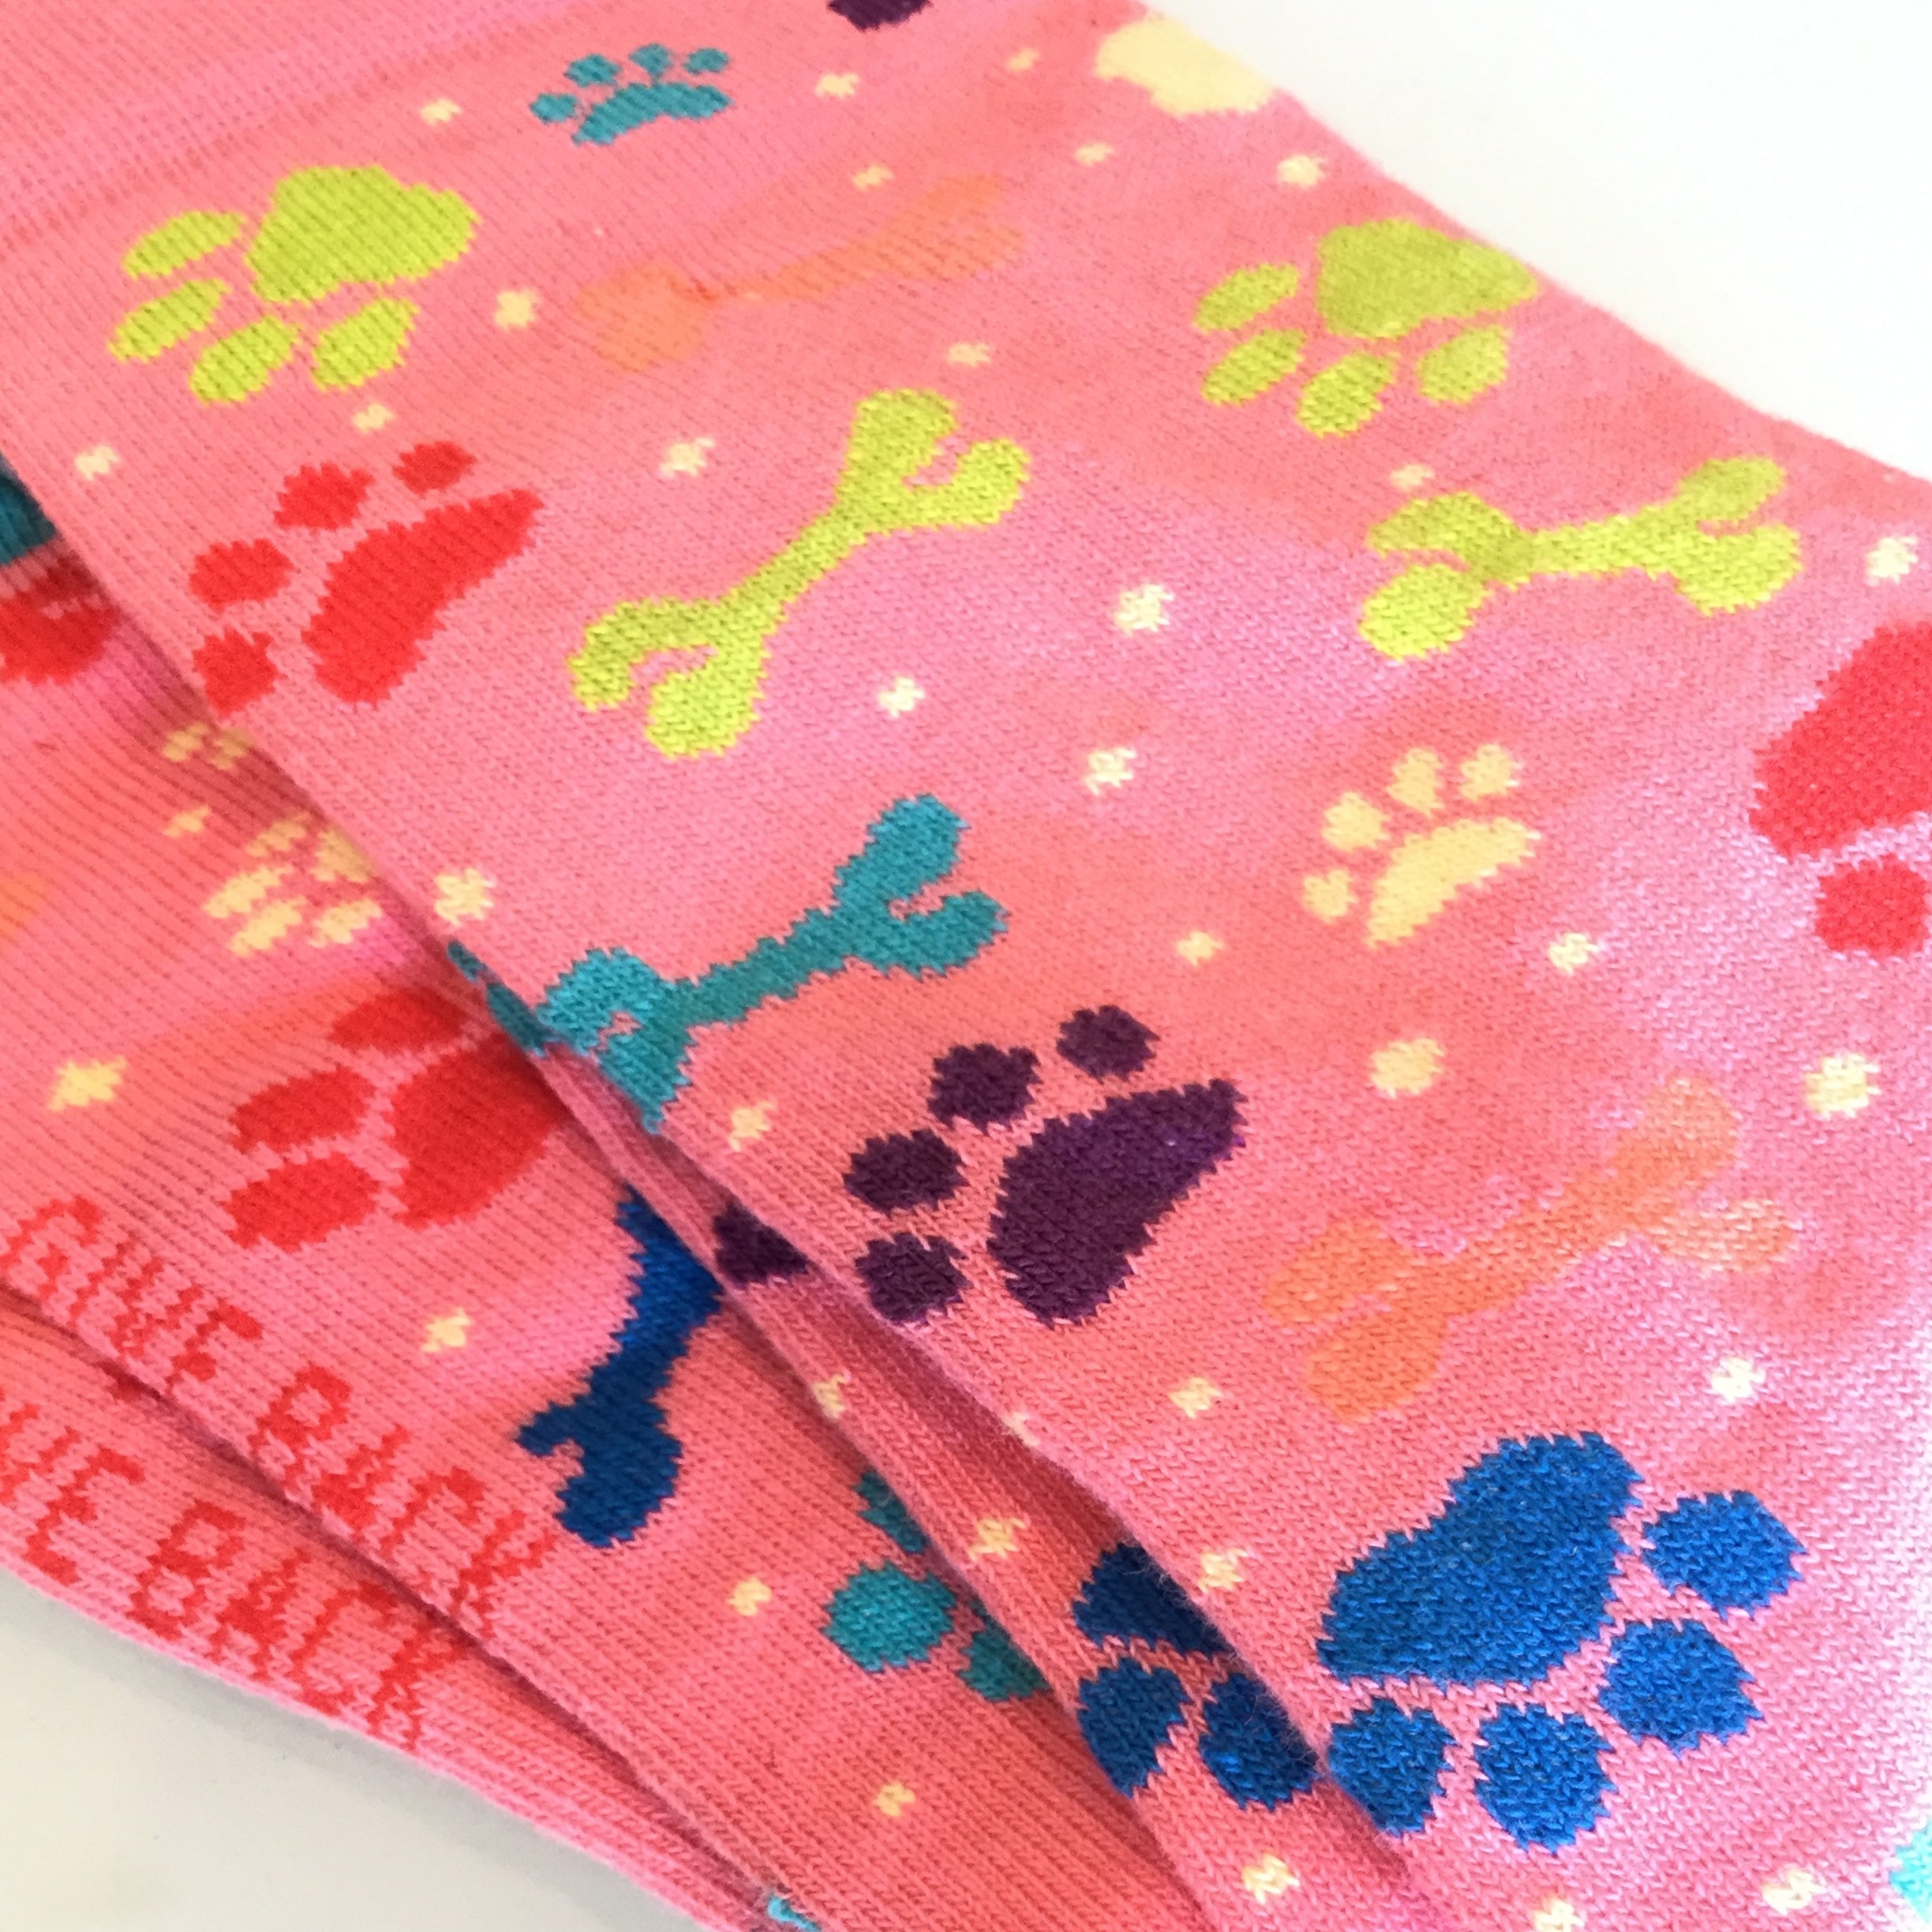 Dog Paws and Bones Patterned Socks from the Sock Panda